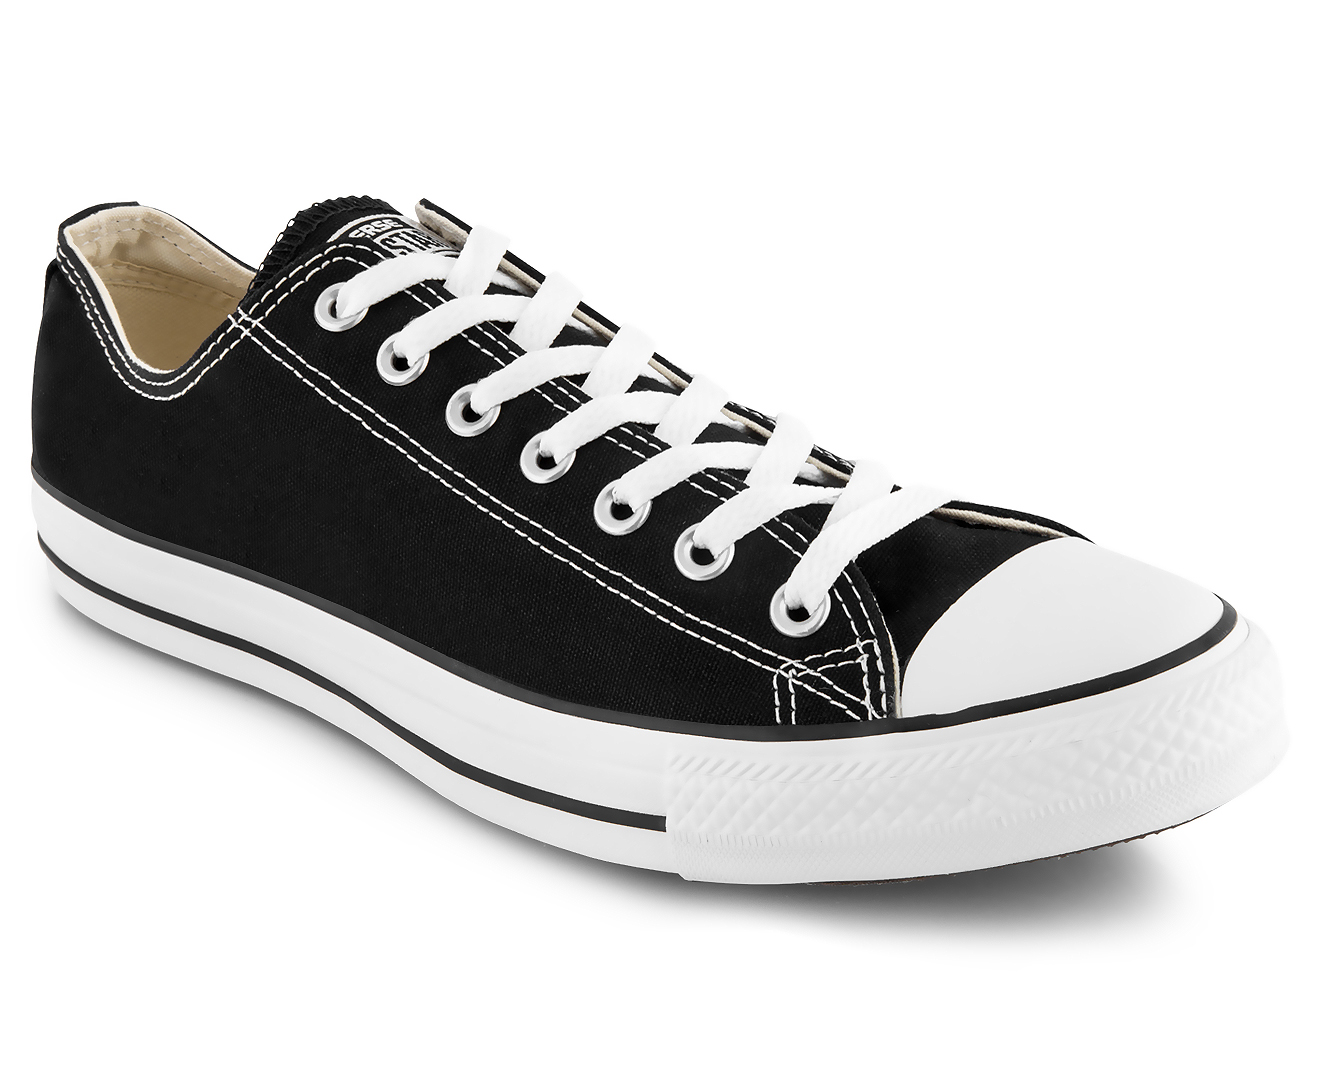 Converse Unisex Chuck Taylor All Star Low Top Sneakers - Black | Catch.co.nz